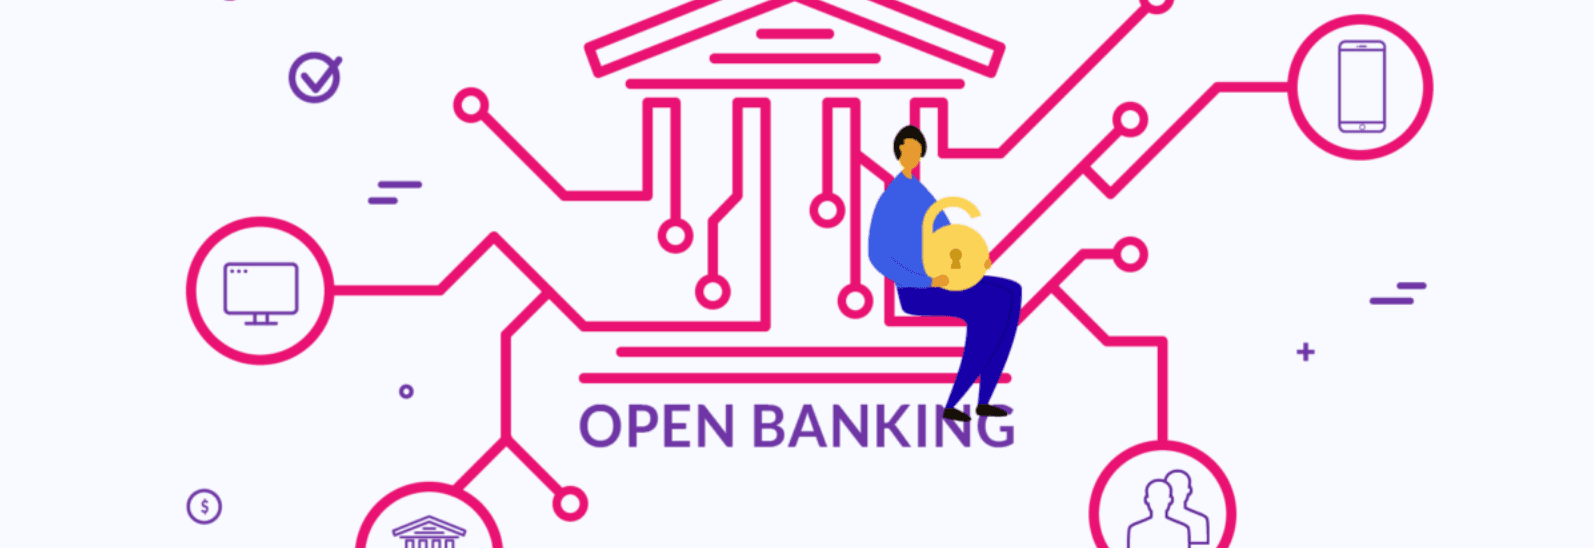 Digital Payments Group Chooses Token for Open Banking - Digital Payments Group